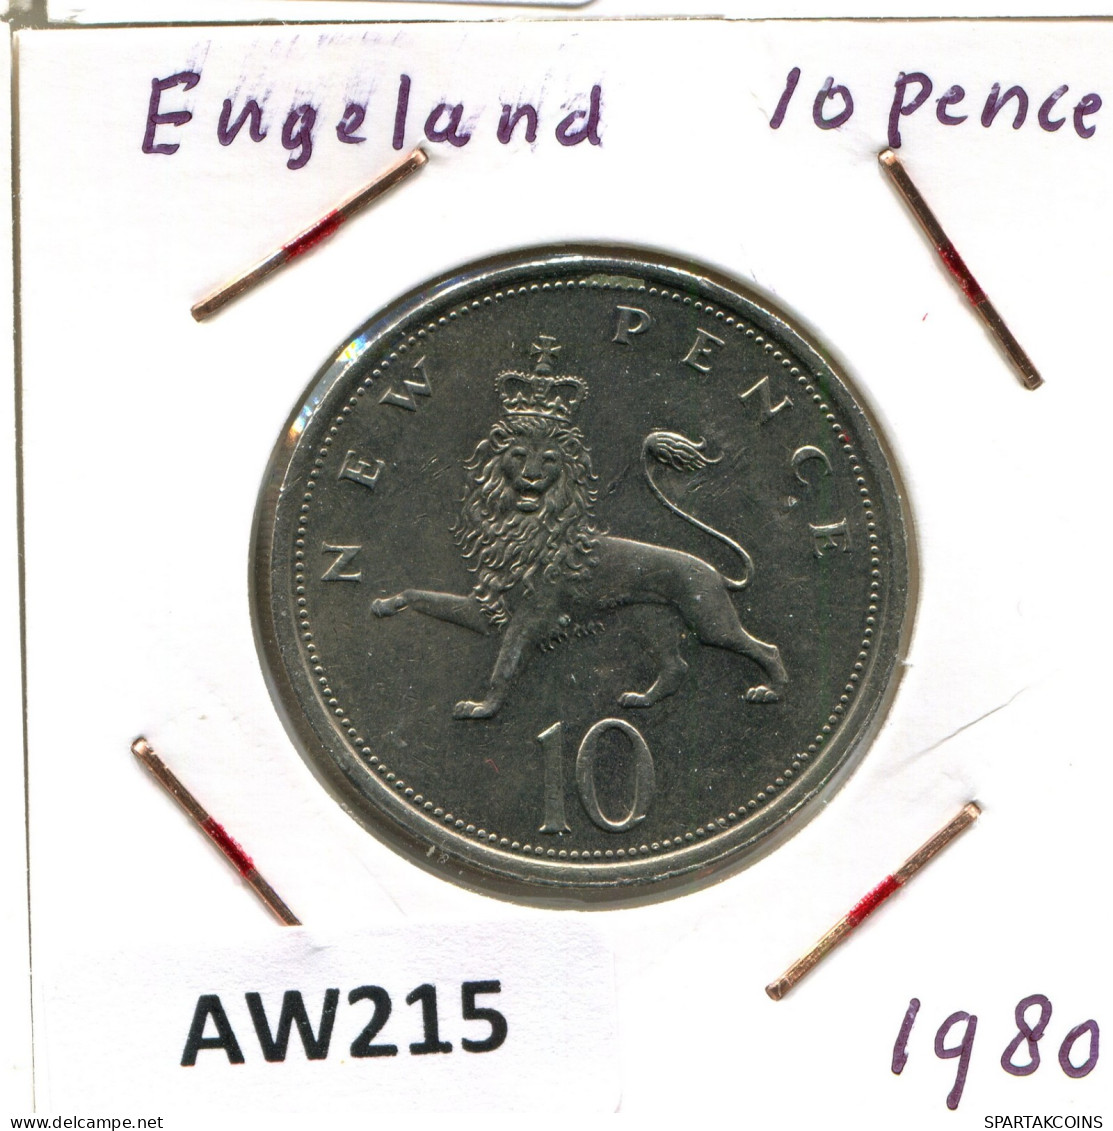 10 PENCE 1980 UK GROßBRITANNIEN GREAT BRITAIN Münze #AW215.D.A - 10 Pence & 10 New Pence